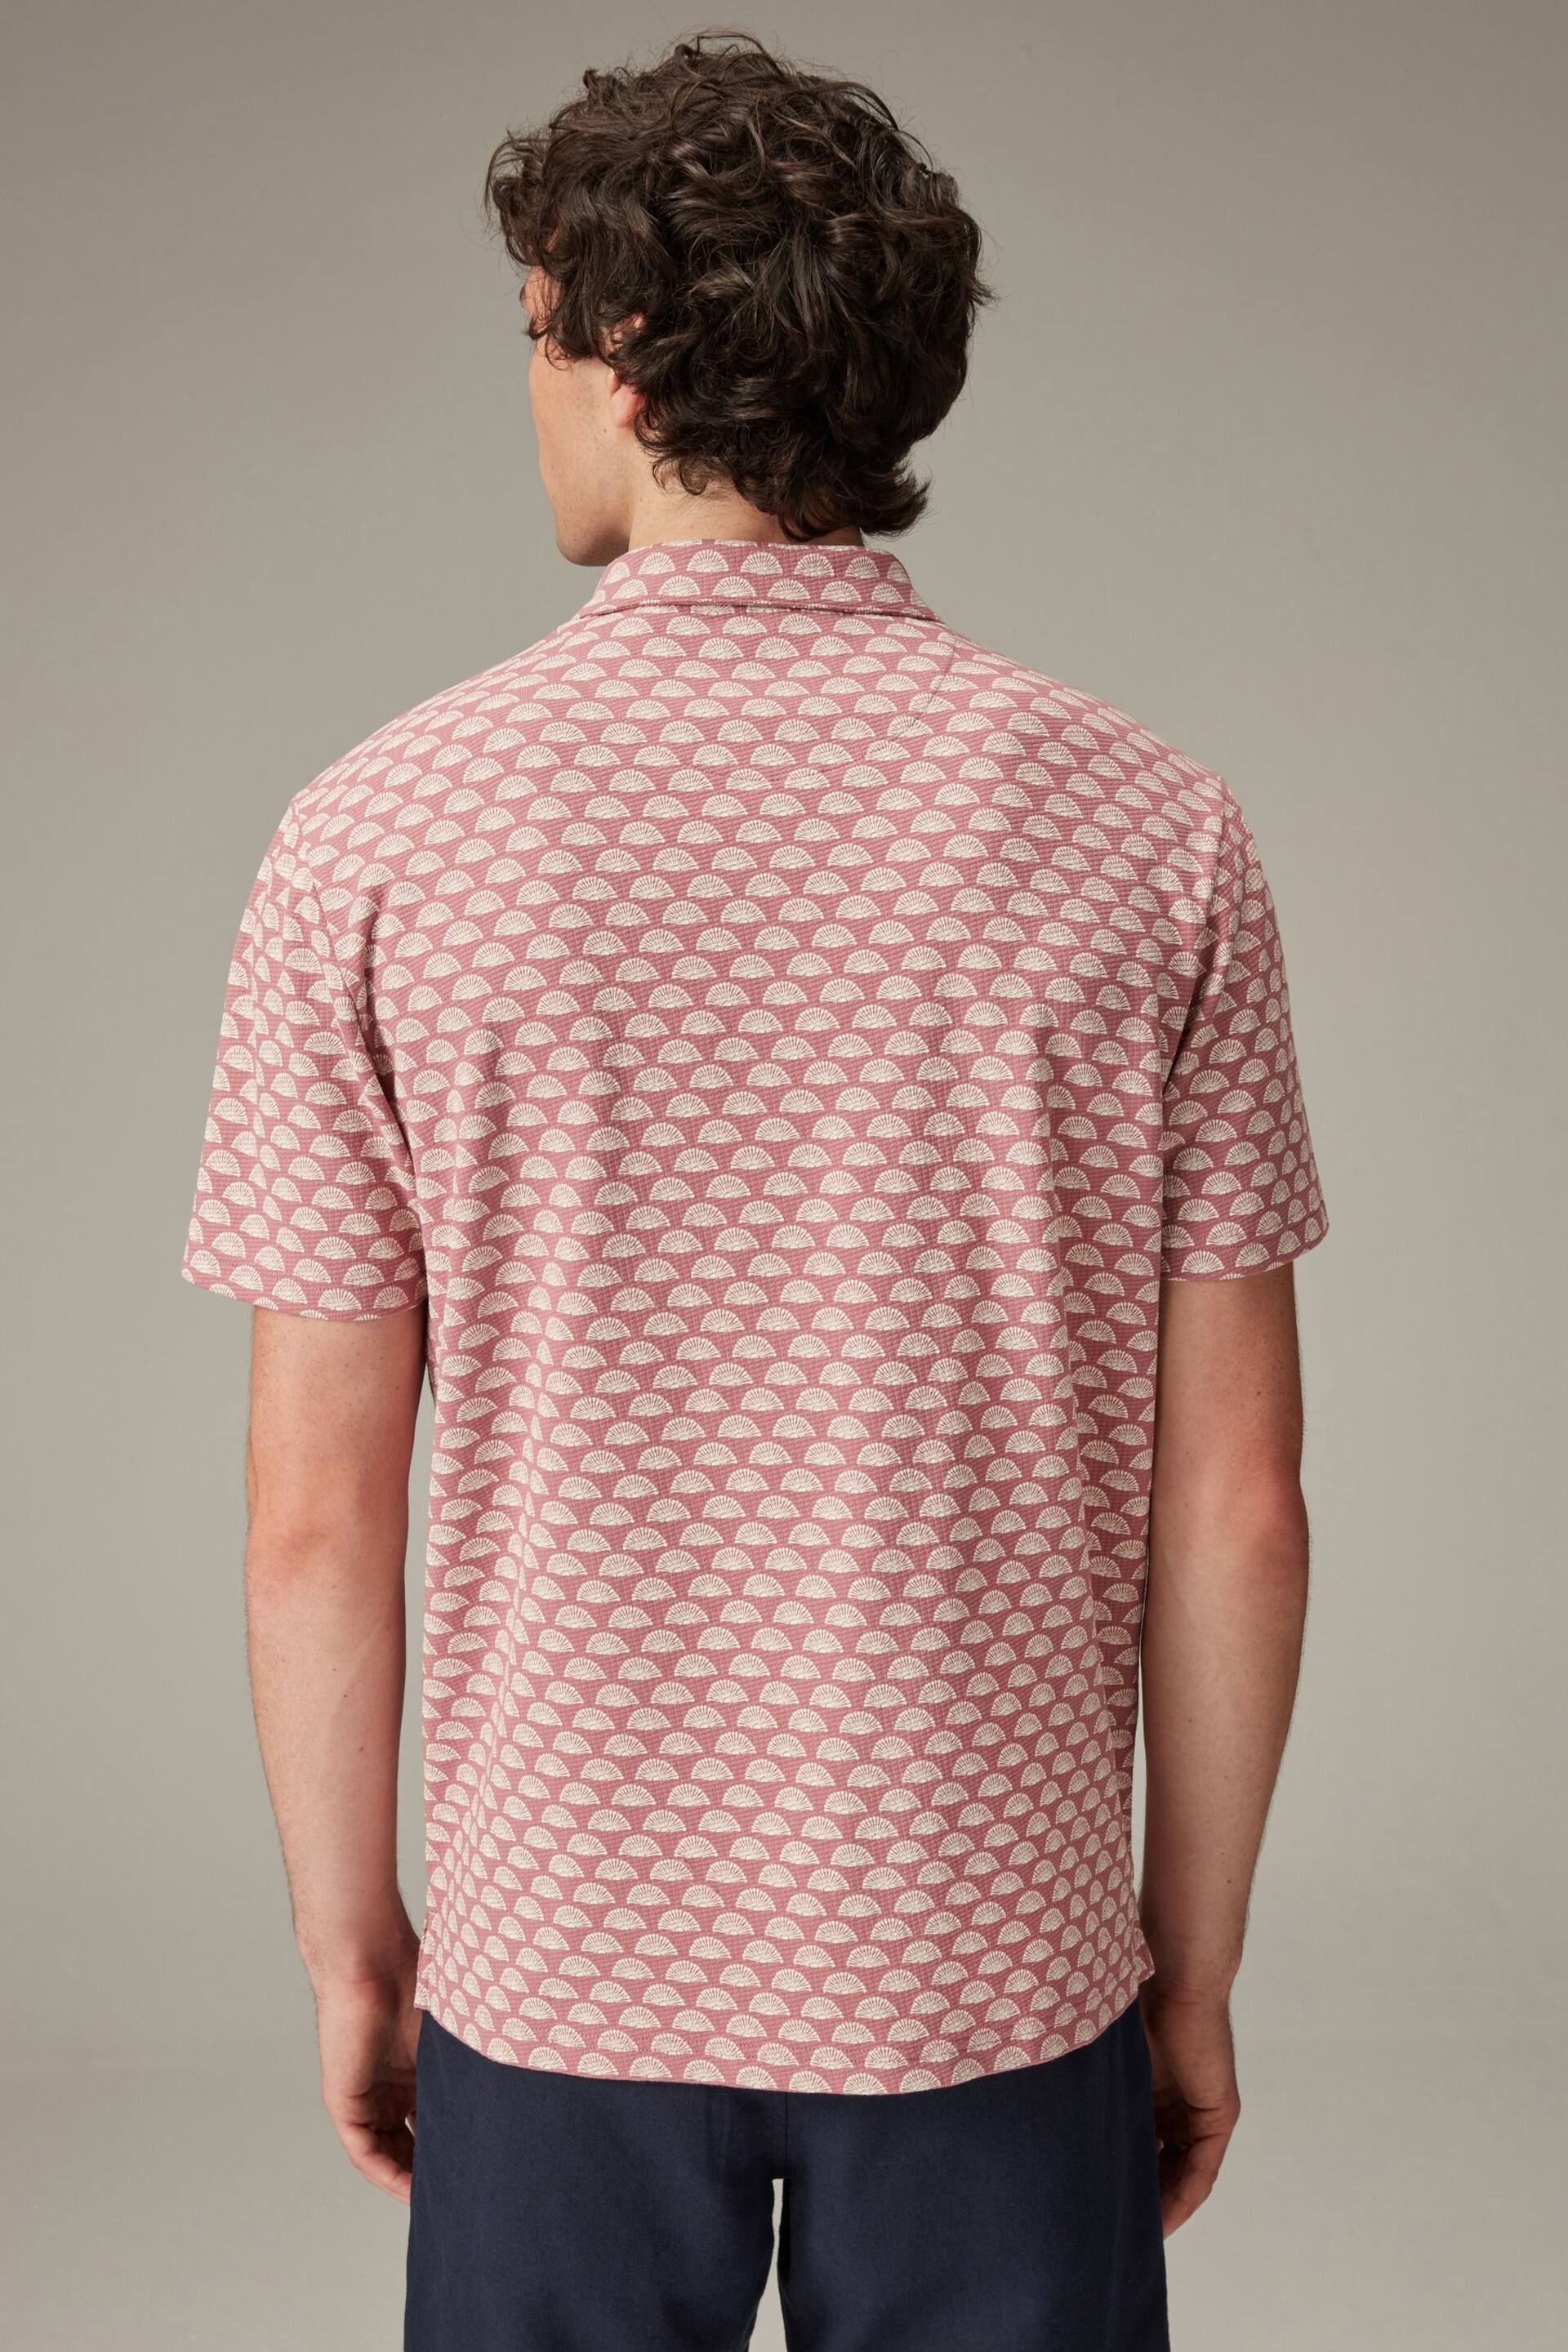 Pink/White Textured Print Polo Shirt - Image 4 of 10